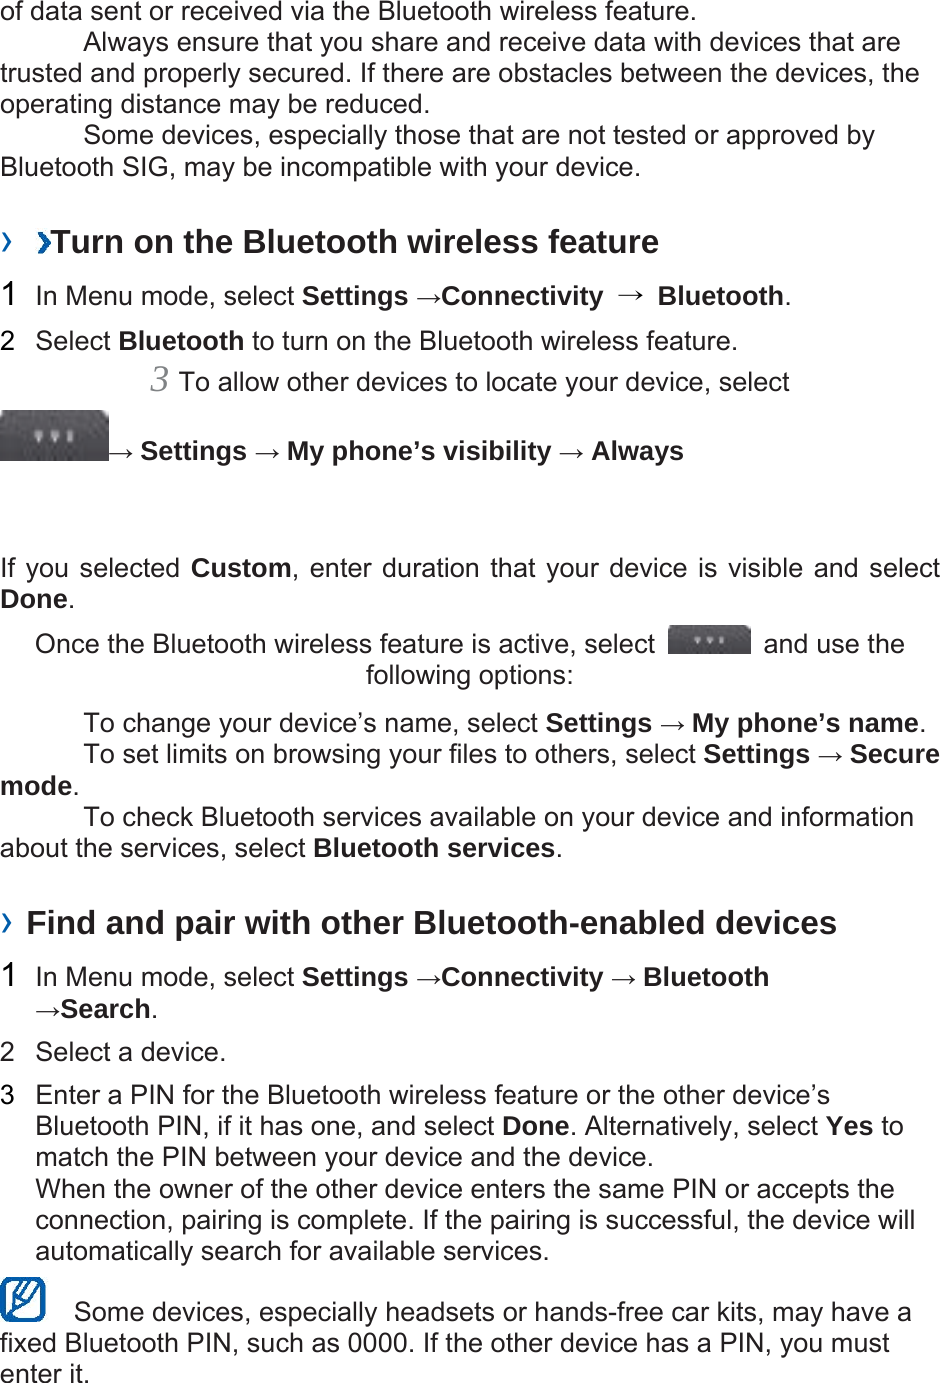 of data sent or received via the Bluetooth wireless feature.     Always ensure that you share and receive data with devices that are trusted and properly secured. If there are obstacles between the devices, the operating distance may be reduced.     Some devices, especially those that are not tested or approved by Bluetooth SIG, may be incompatible with your device.    ›  Turn on the Bluetooth wireless feature   1  In Menu mode, select Settings →Connectivity  → Bluetooth.  2  Select Bluetooth to turn on the Bluetooth wireless feature.   3 To allow other devices to locate your device, select   → Settings → My phone’s visibility → Always   If you selected Custom, enter duration that your device is visible and select Done.  Once the Bluetooth wireless feature is active, select    and use the following options:     To change your device’s name, select Settings → My phone’s name.    To set limits on browsing your files to others, select Settings → Secure mode.    To check Bluetooth services available on your device and information about the services, select Bluetooth services.   › Find and pair with other Bluetooth-enabled devices   1  In Menu mode, select Settings →Connectivity → Bluetooth →Search.  2  Select a device.   3  Enter a PIN for the Bluetooth wireless feature or the other device’s Bluetooth PIN, if it has one, and select Done. Alternatively, select Yes to match the PIN between your device and the device.   When the owner of the other device enters the same PIN or accepts the connection, pairing is complete. If the pairing is successful, the device will automatically search for available services.     Some devices, especially headsets or hands-free car kits, may have a fixed Bluetooth PIN, such as 0000. If the other device has a PIN, you must enter it.   